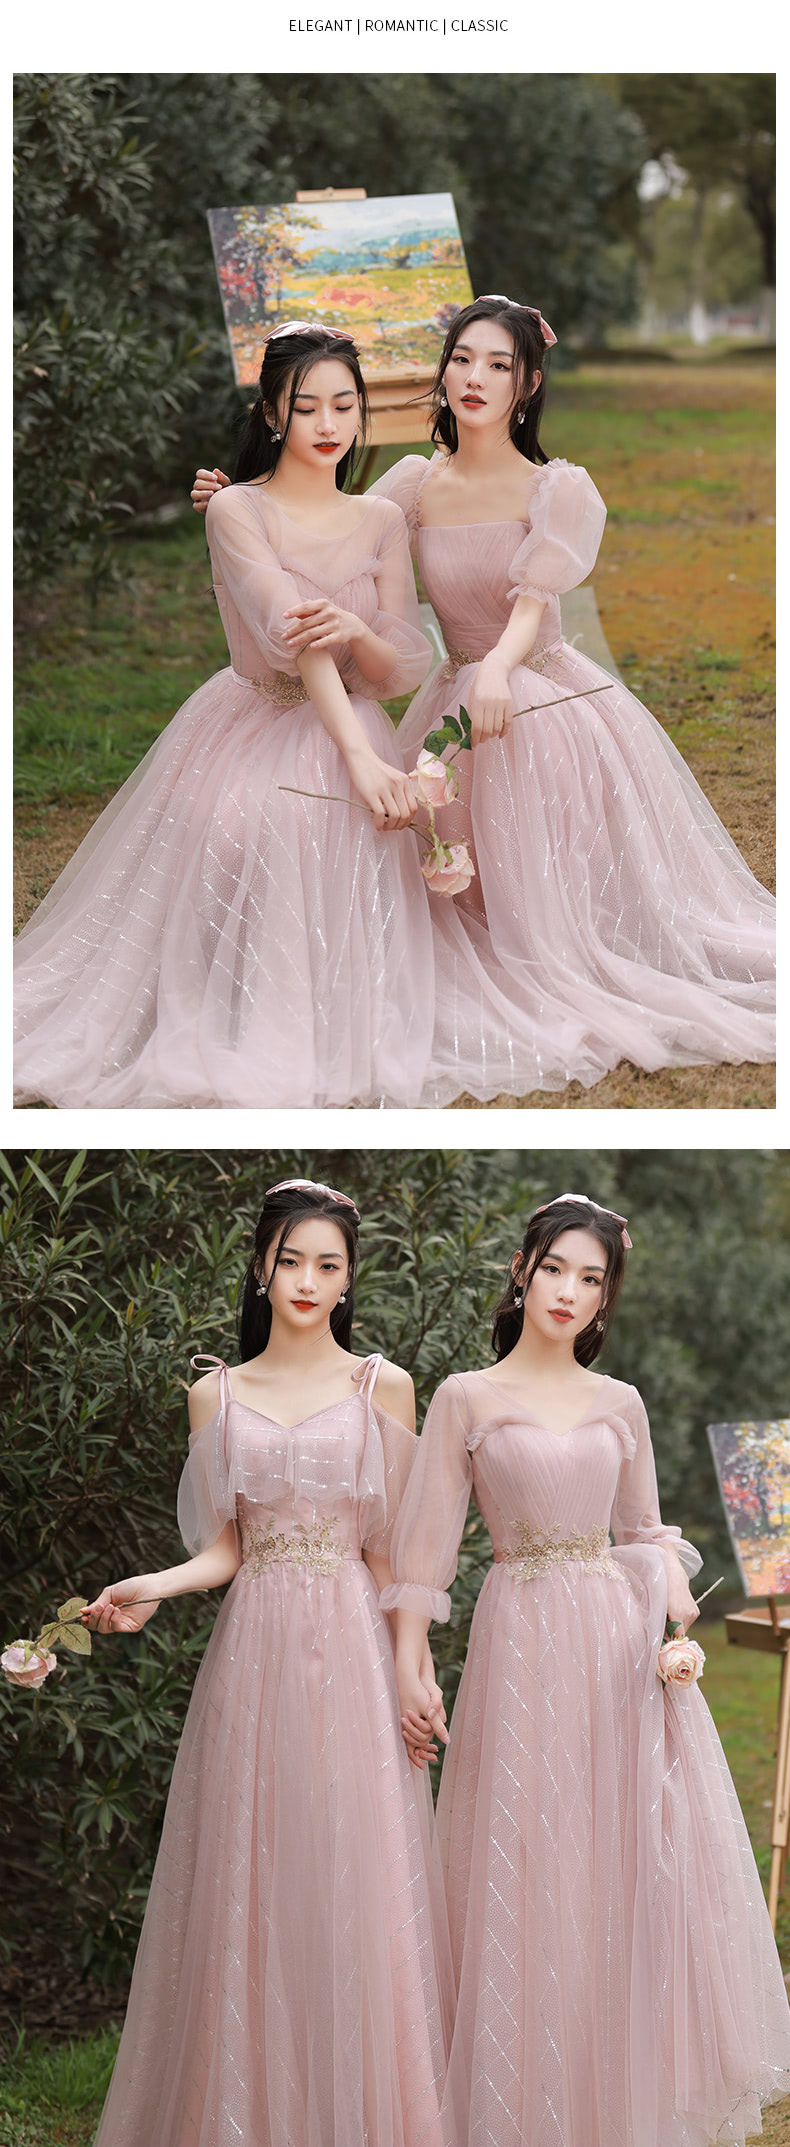 Fairy-Pink-Bridesmaid-Dress-with-Sleeves-Chiffon-Long-Casual-Gown16.jpg